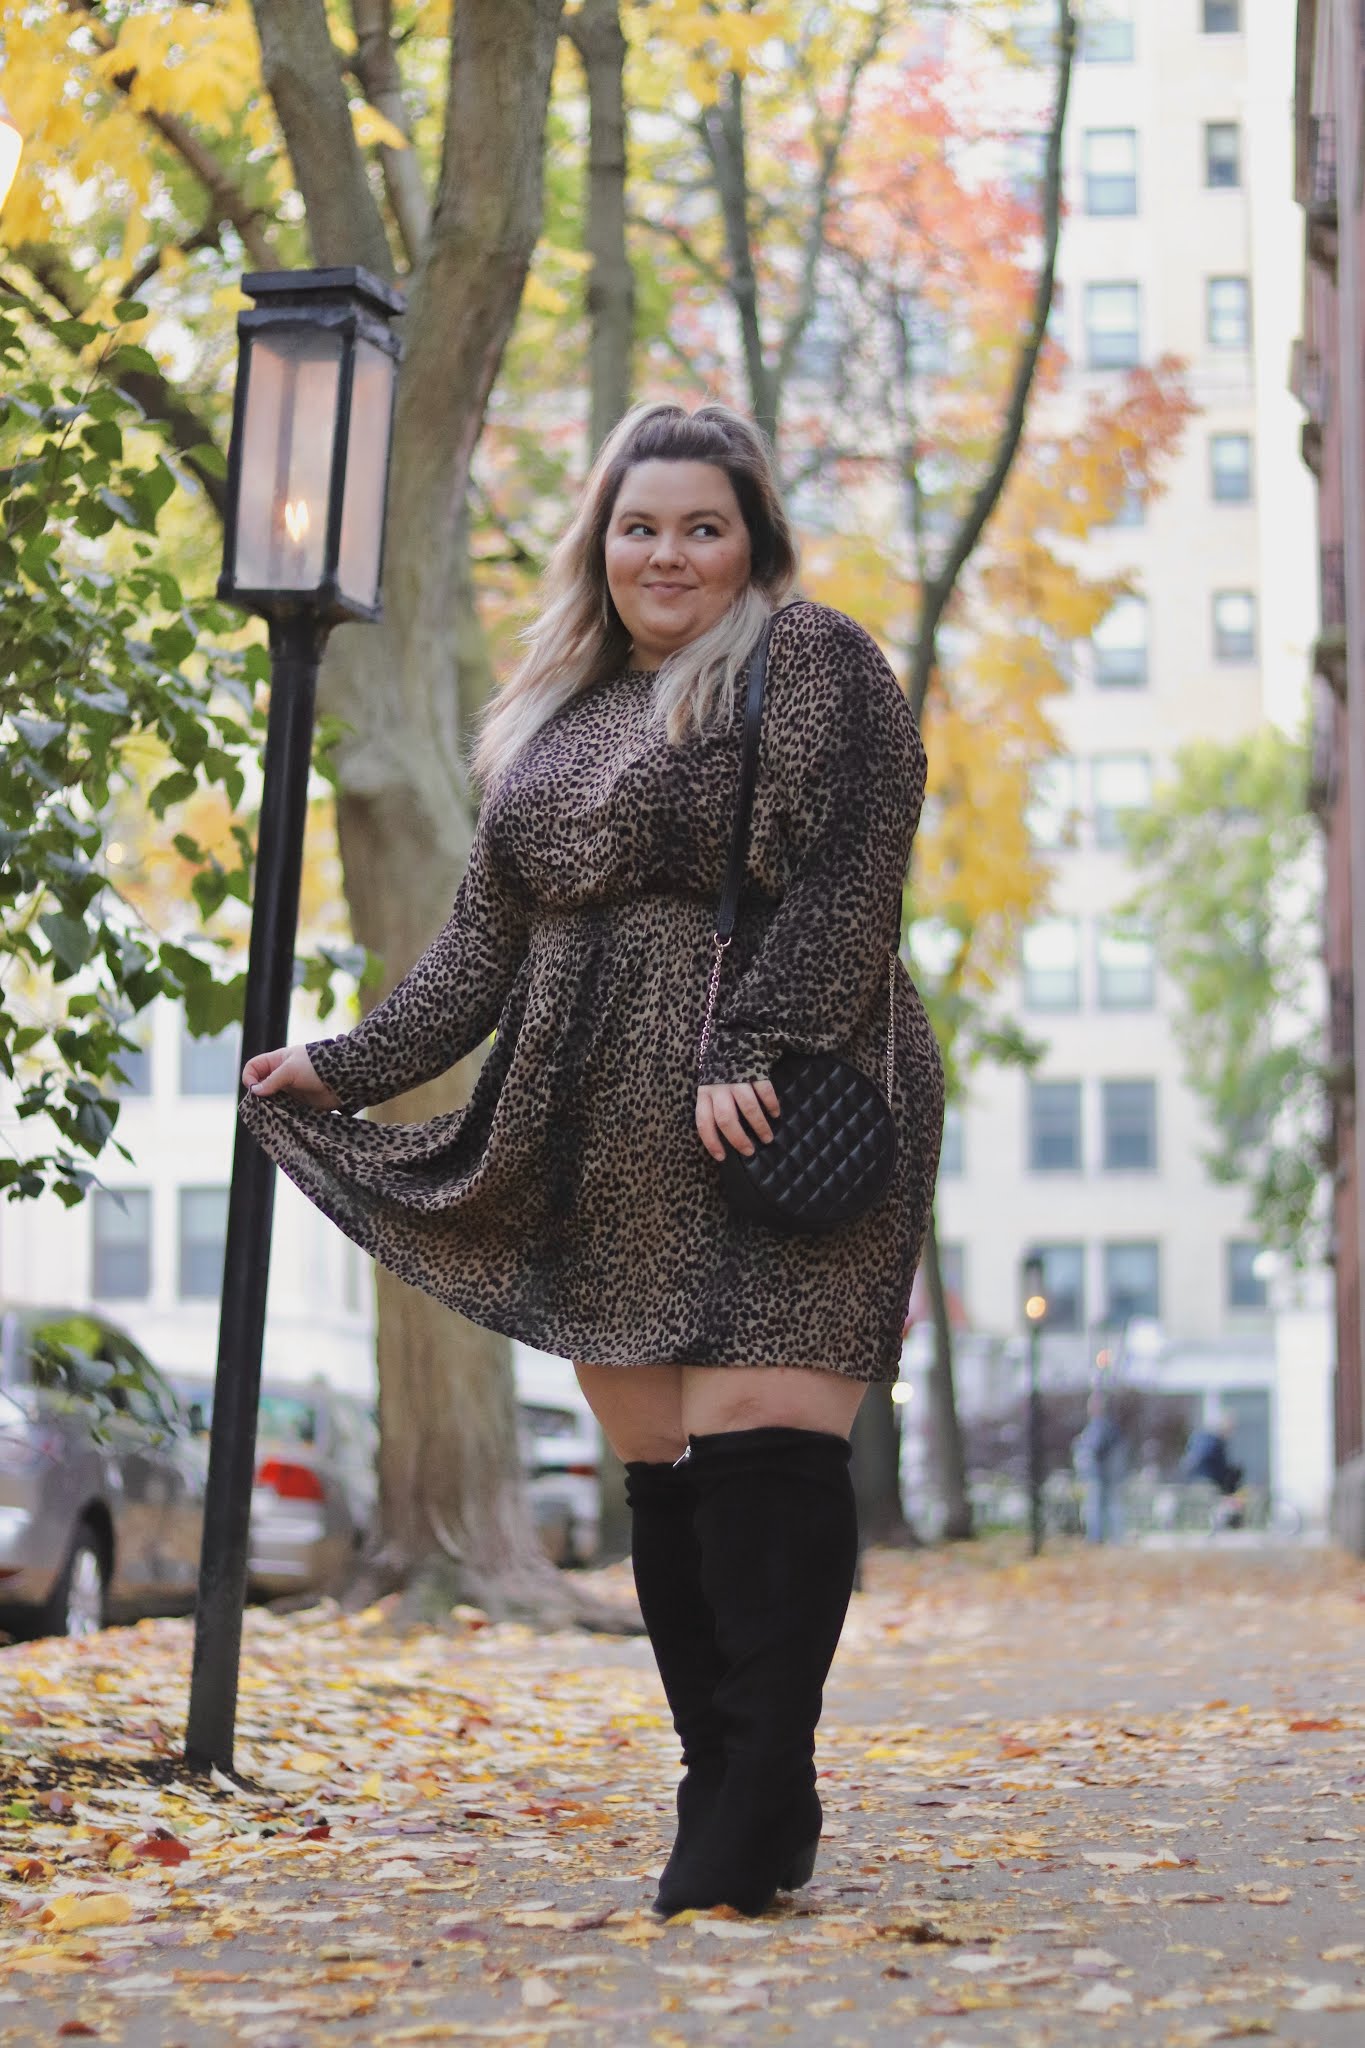 Chicago Plus Size Petite Fashion Blogger and model Natalie Craig Natalie in the City plus size dresses wide calf boots